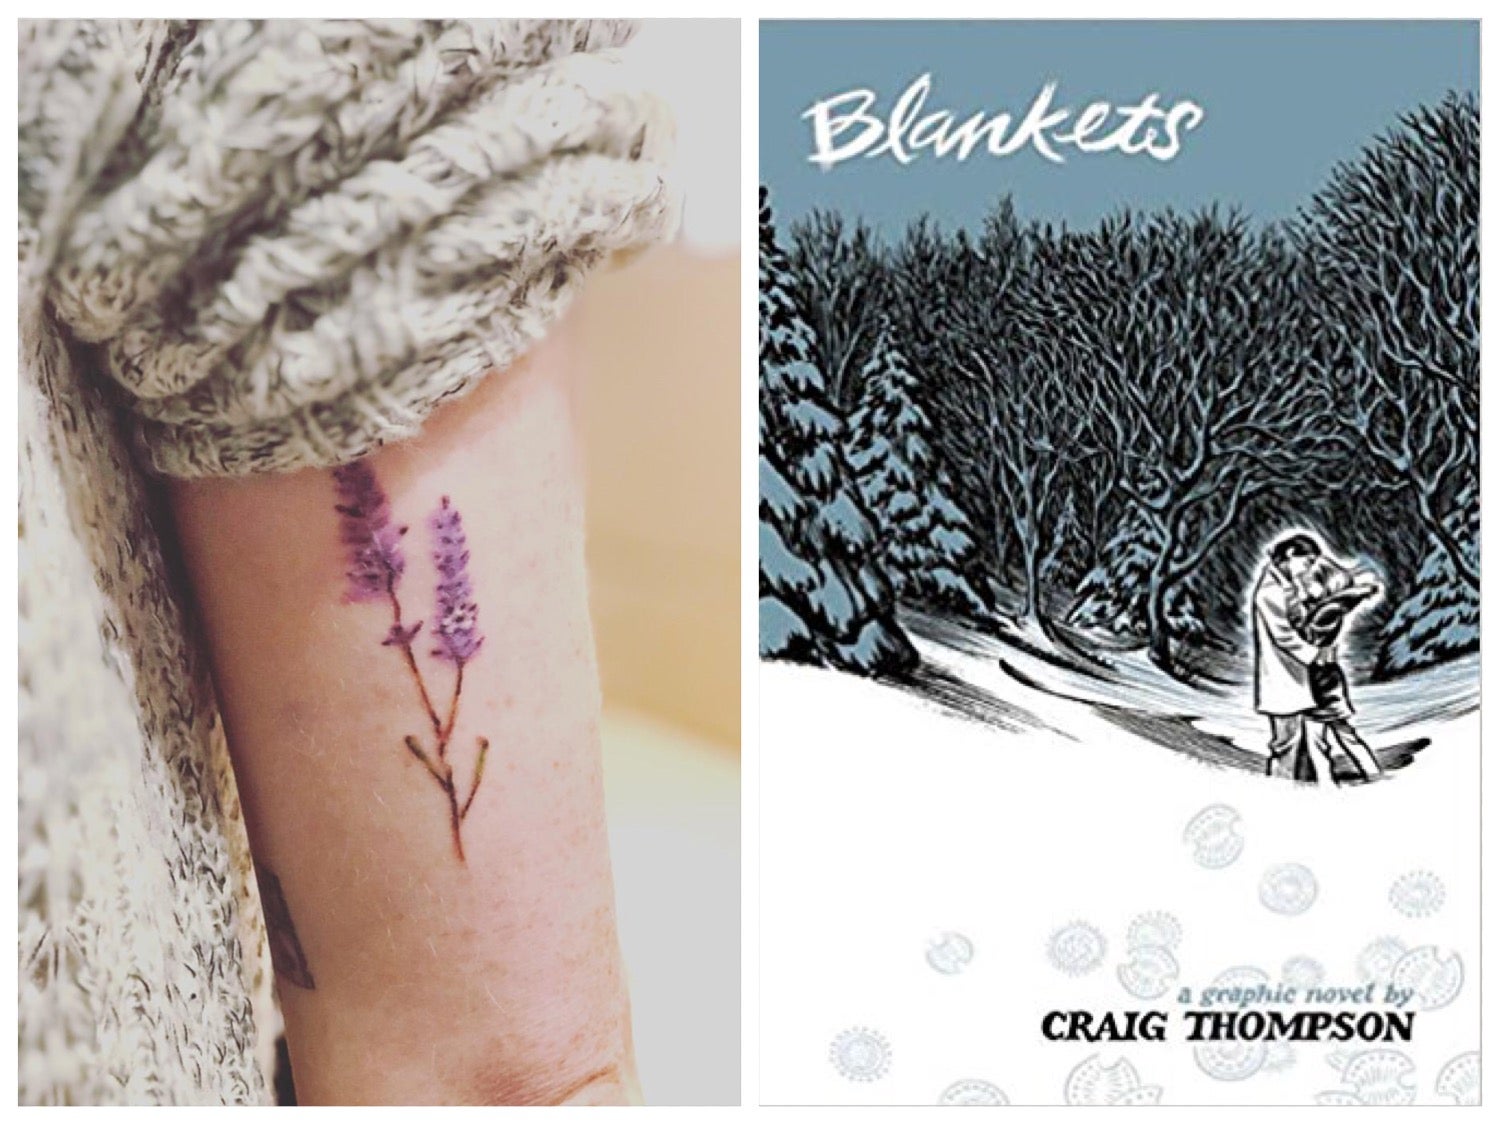 Image of tattoo next to book cover